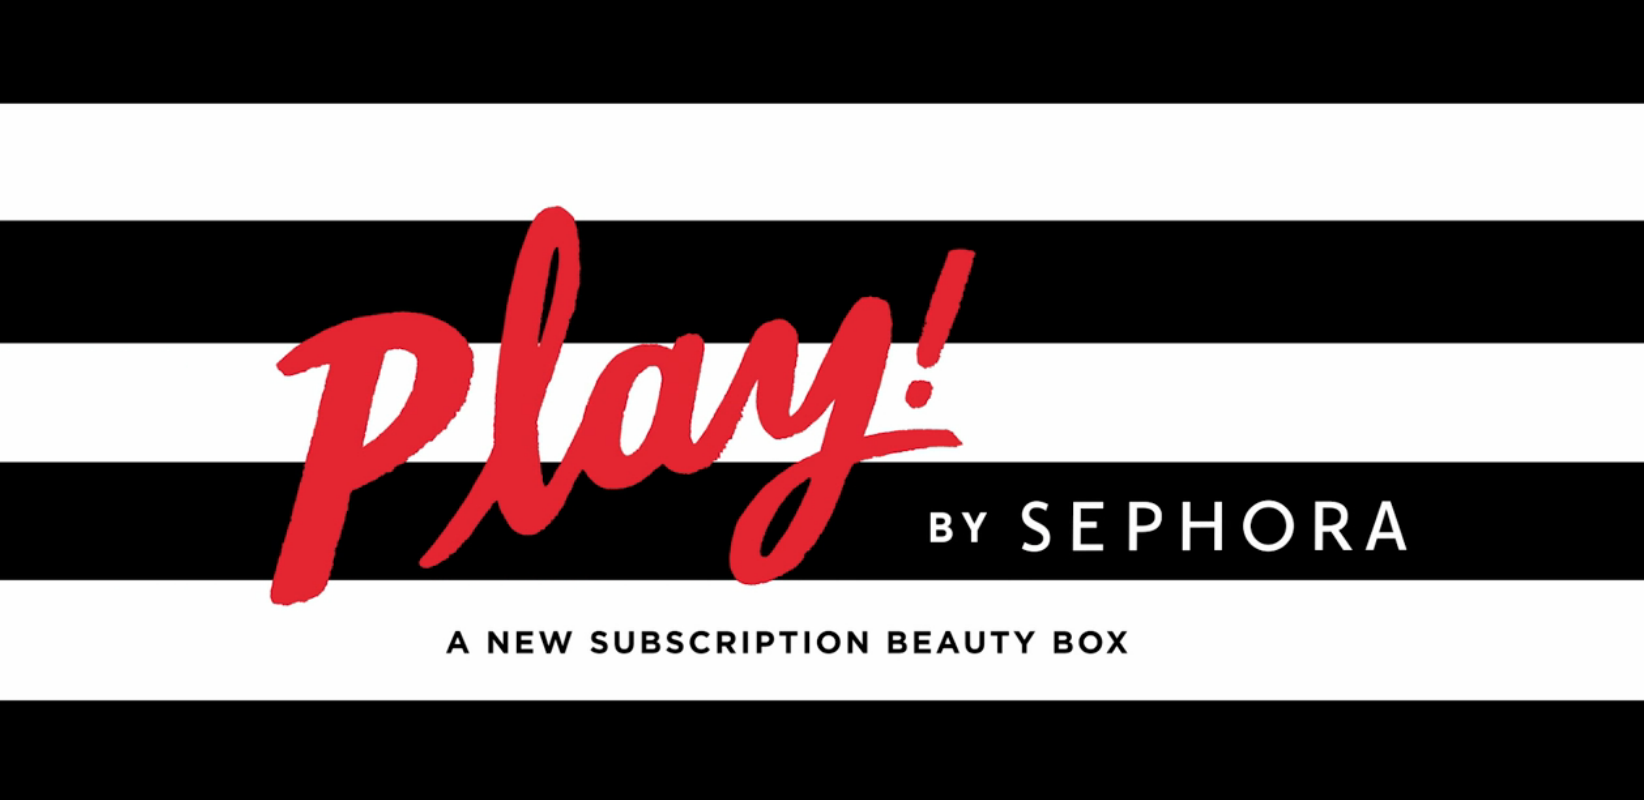 Play! By Sephora October 2015 Subscription Box Reveal